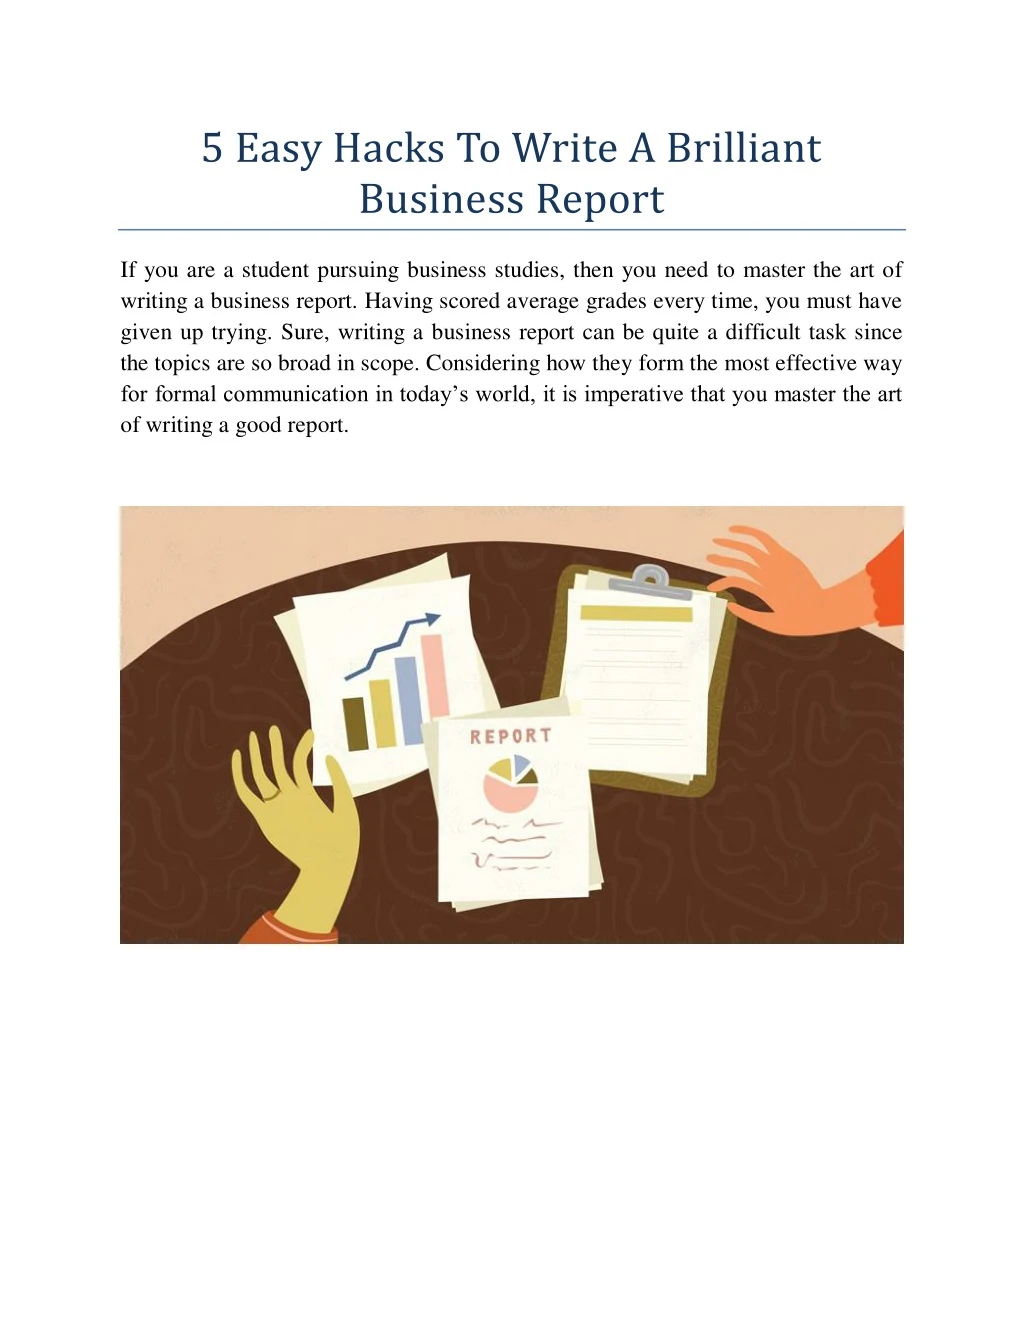 5 easy hacks to write a brilliant business report